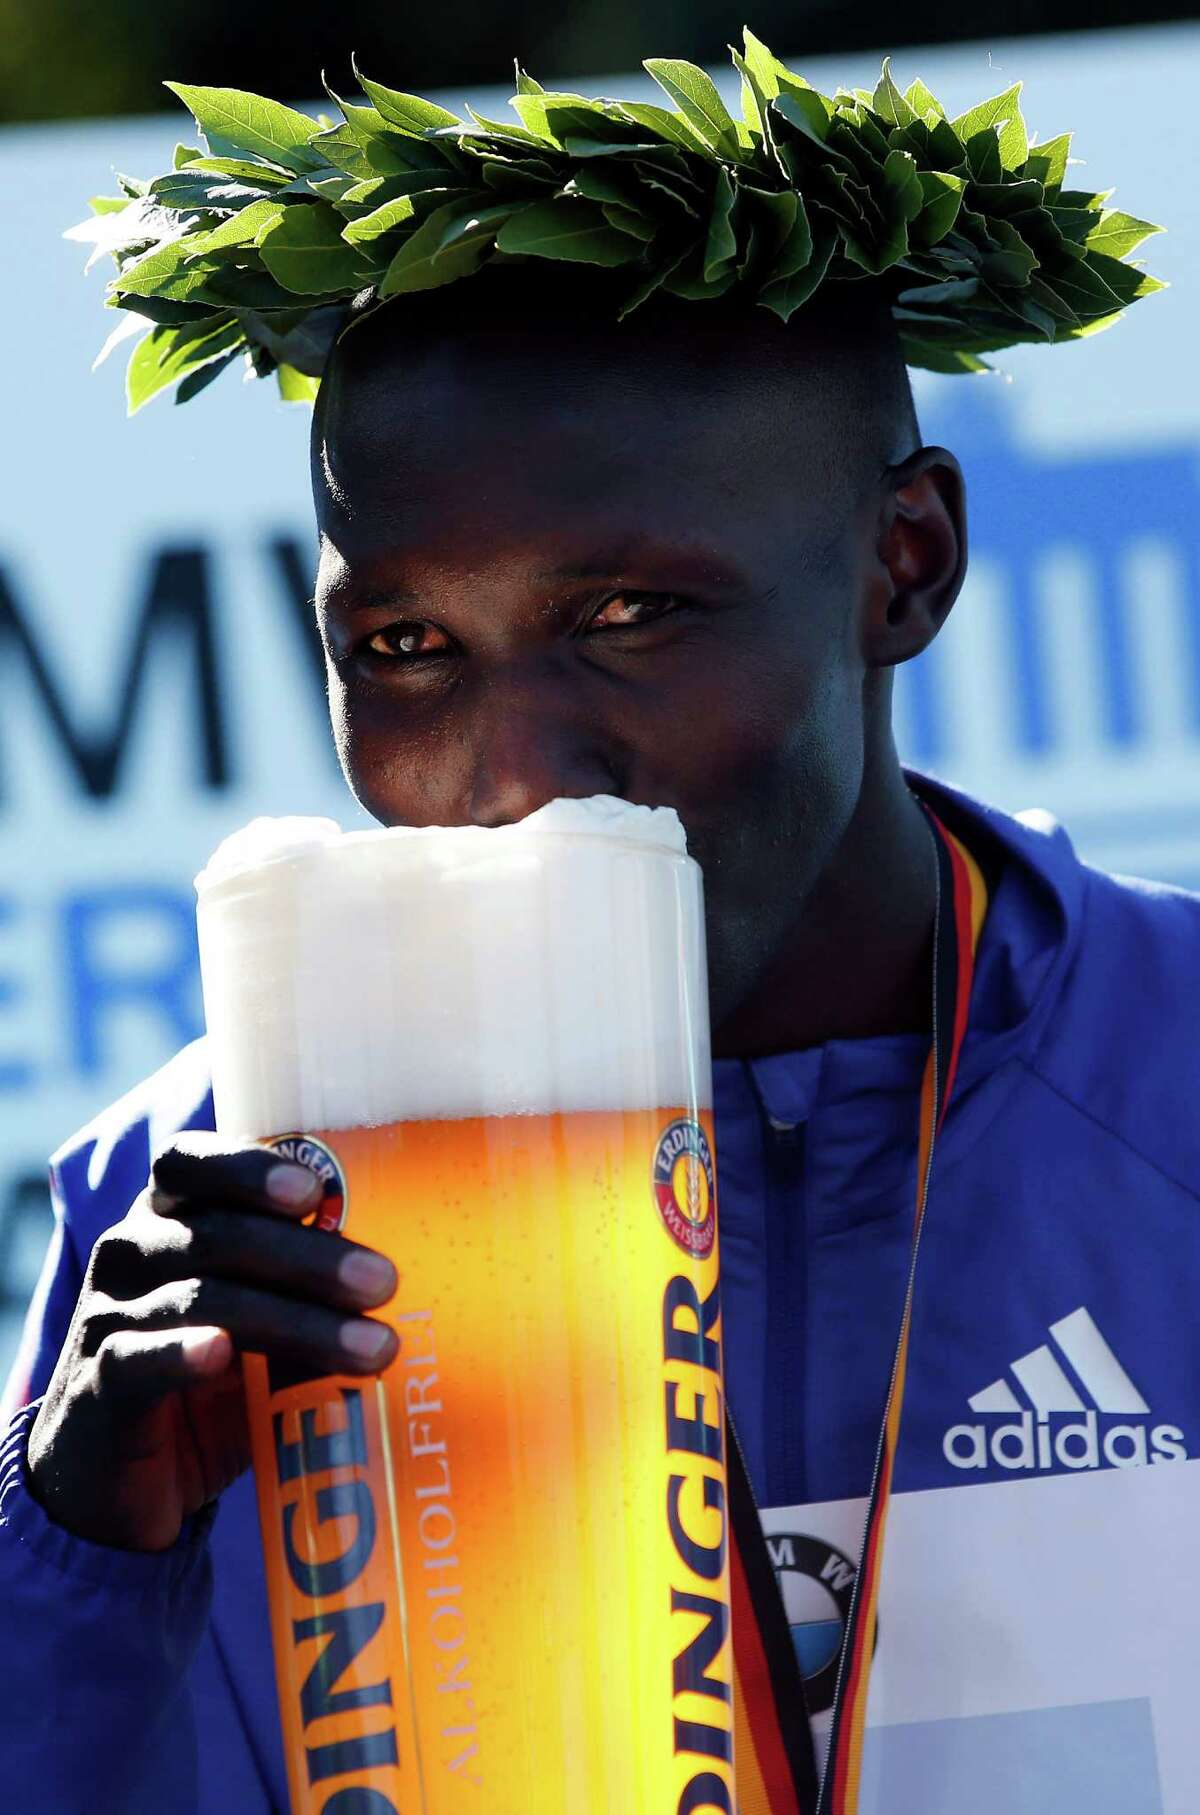 It may take Wilson Kipsang longer to put away his post-race beer than he needed to run the Berlin Marathon on Sunday, as the Kenyan finished in 2:03:23 - the fastest marathon time by 15 seconds.